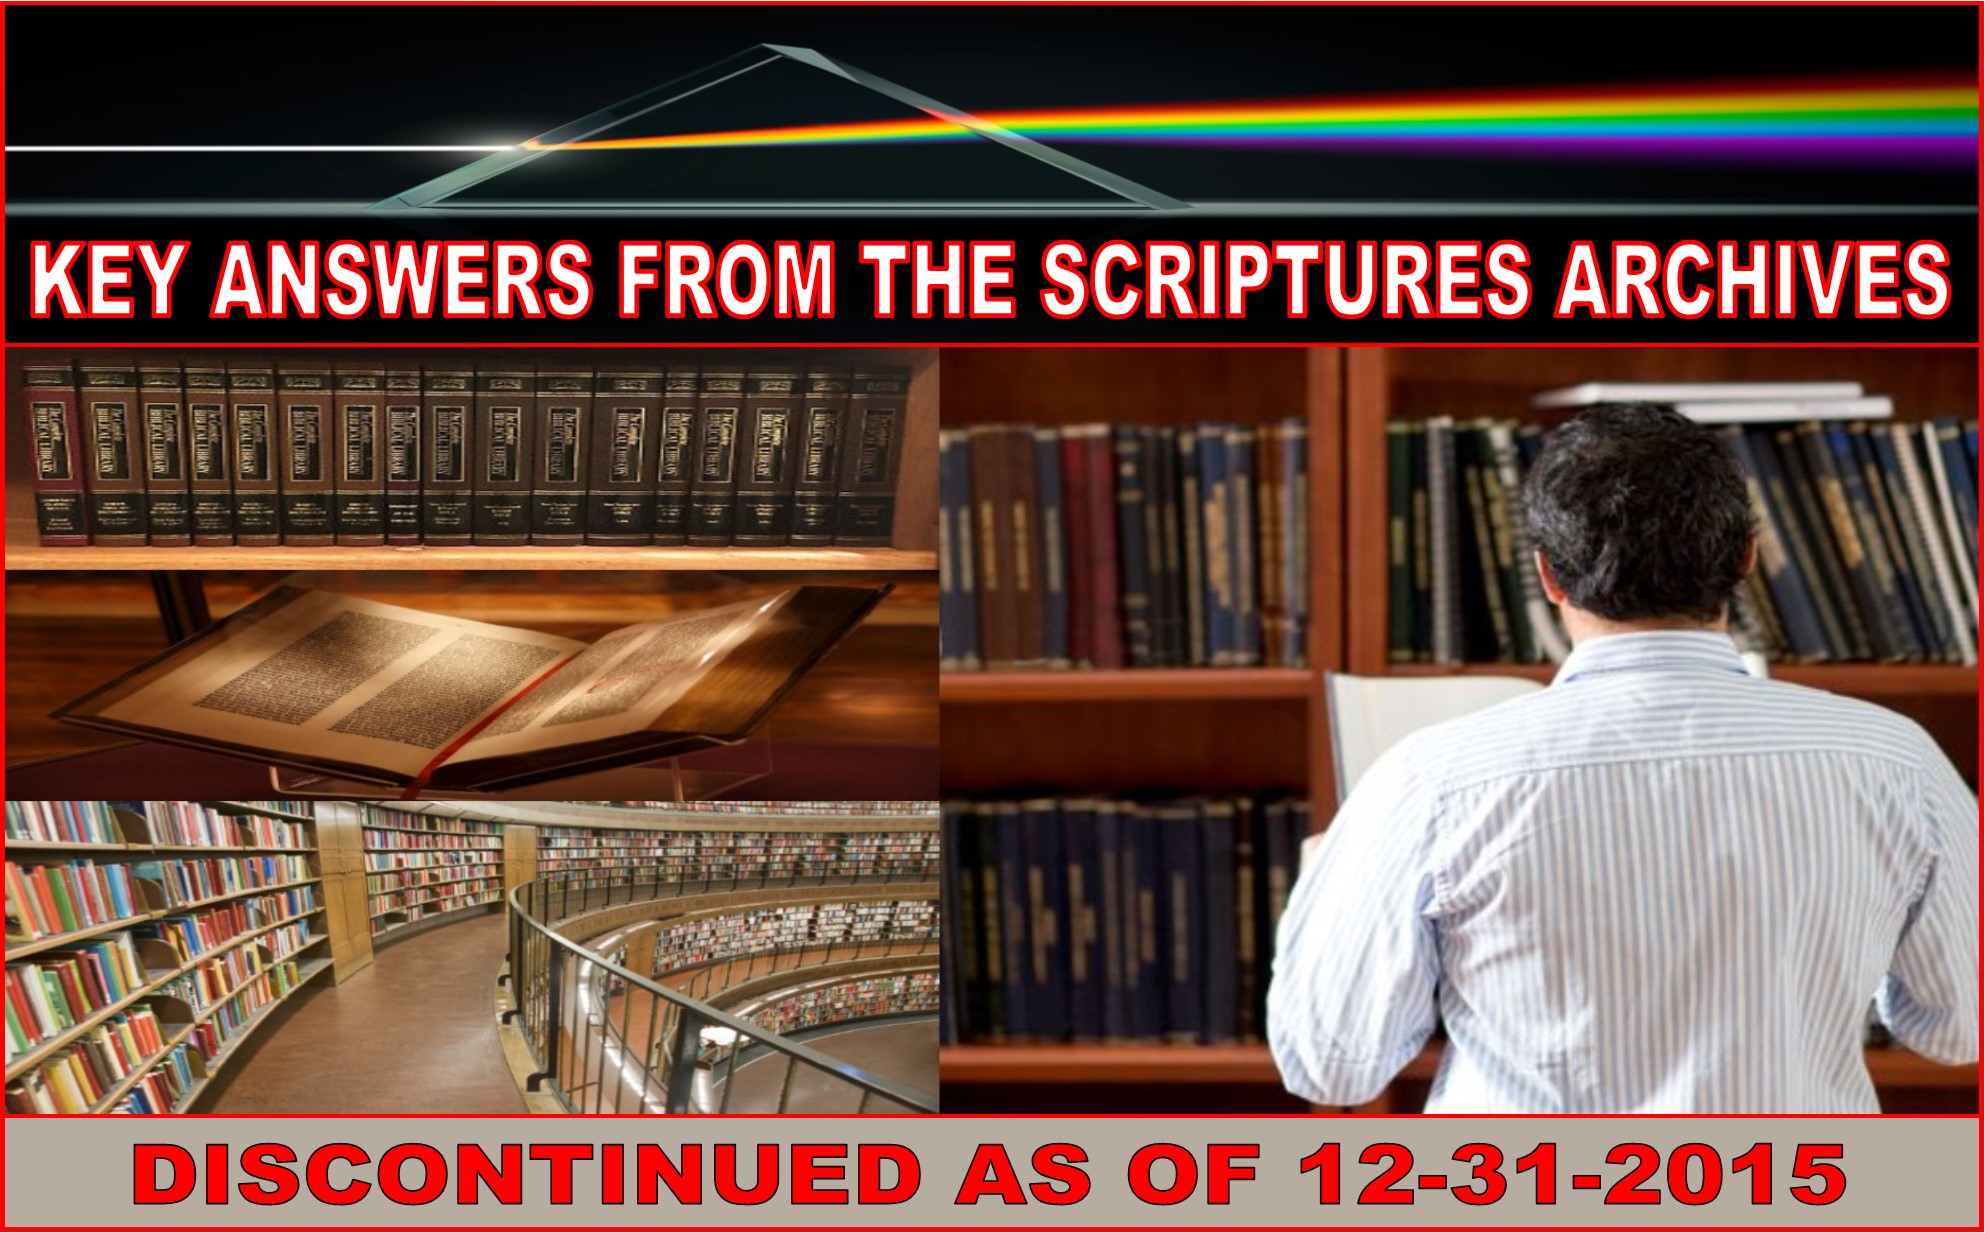 KEY ANSWERS FROM THE SCRIPTURES ARCHIVES HEADER LOGO 5-20-2021